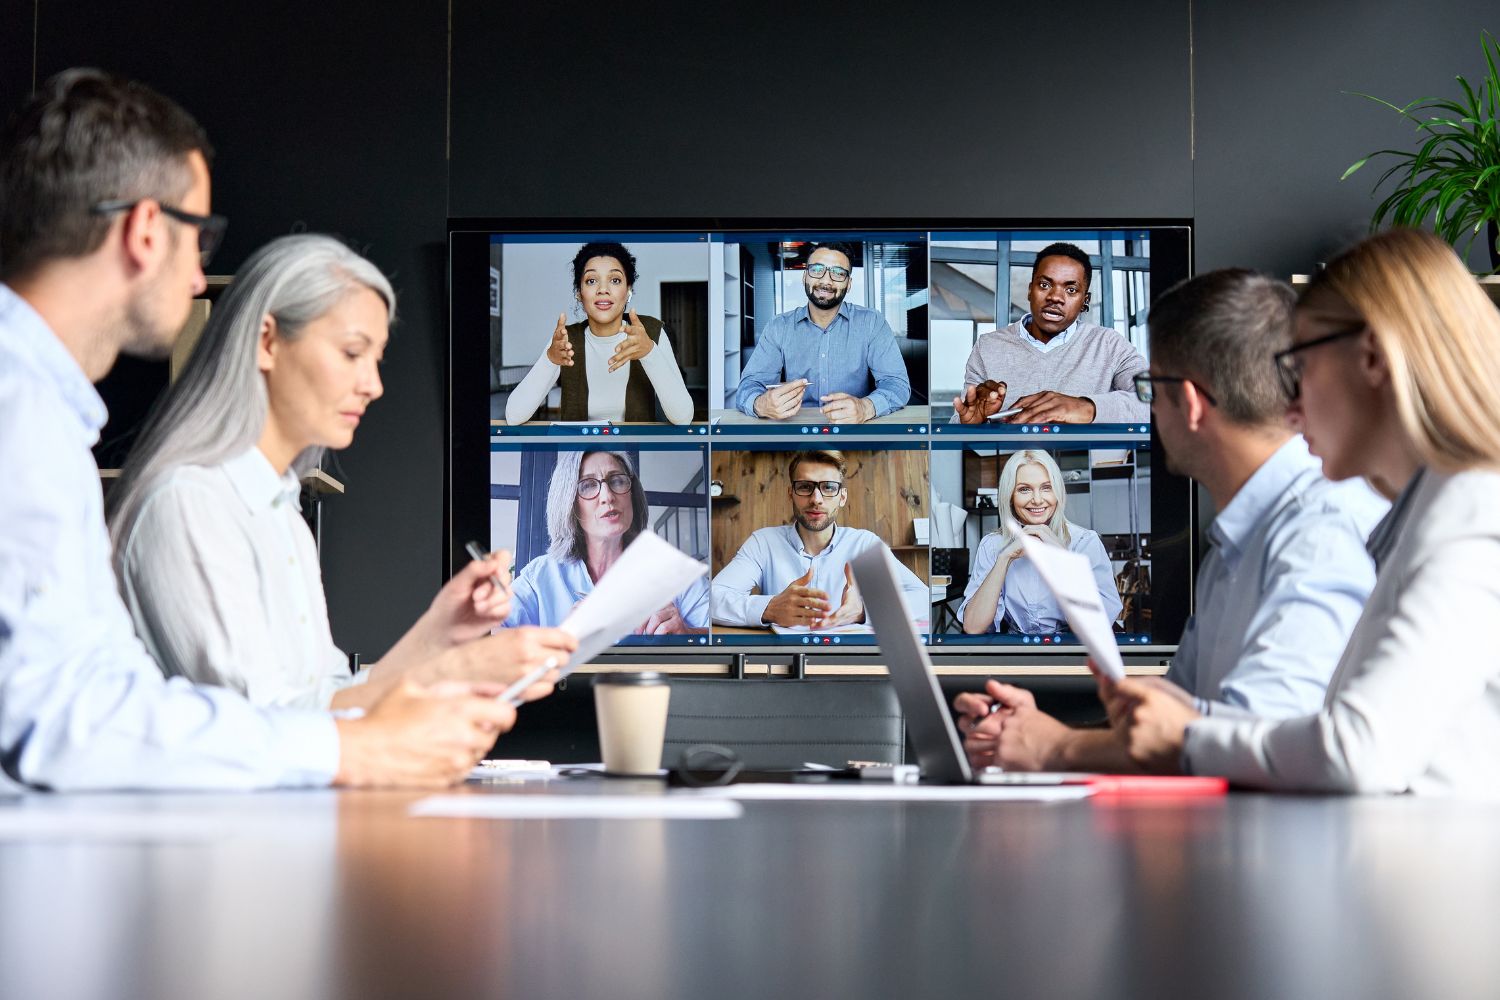 Image of IVirtual Collaboration in a Global Business Setting, Enhanced by Skillcets' Programmes in Business English, Cultural Intelligence, Leadership, and Inclusion for International Environments.